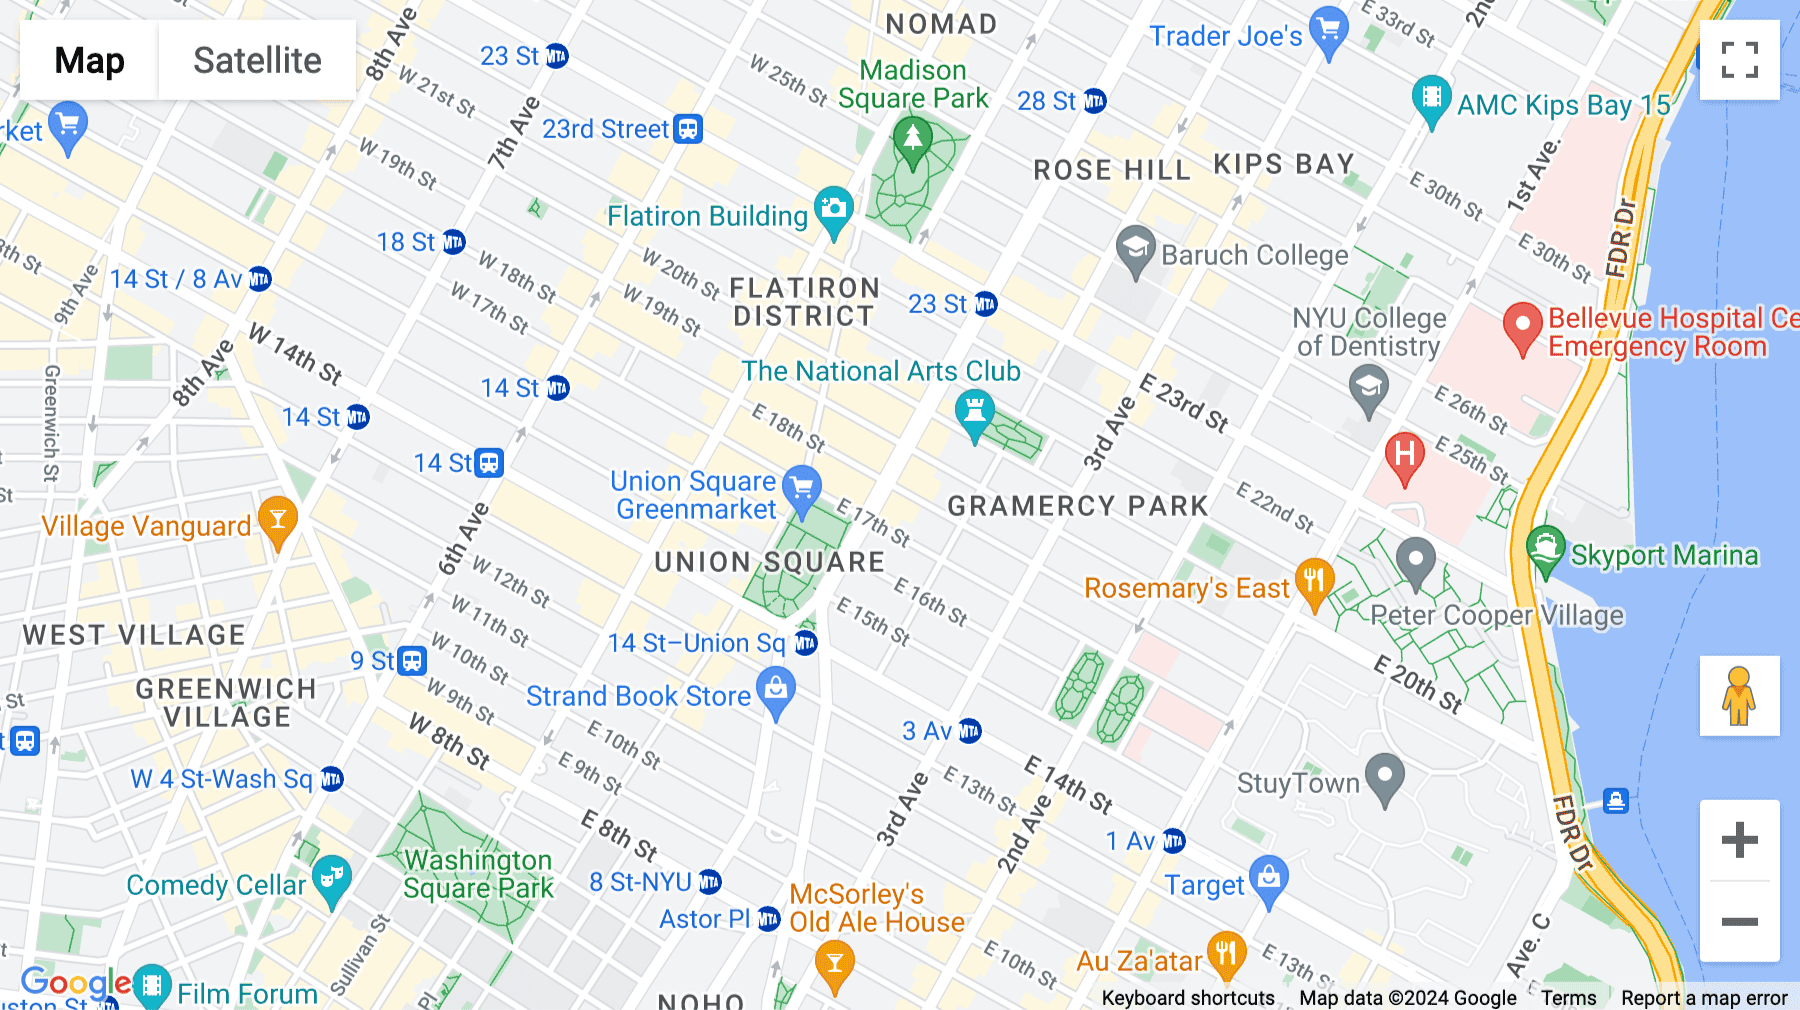 Click for interative map of 215 Park Avenue South, New York City